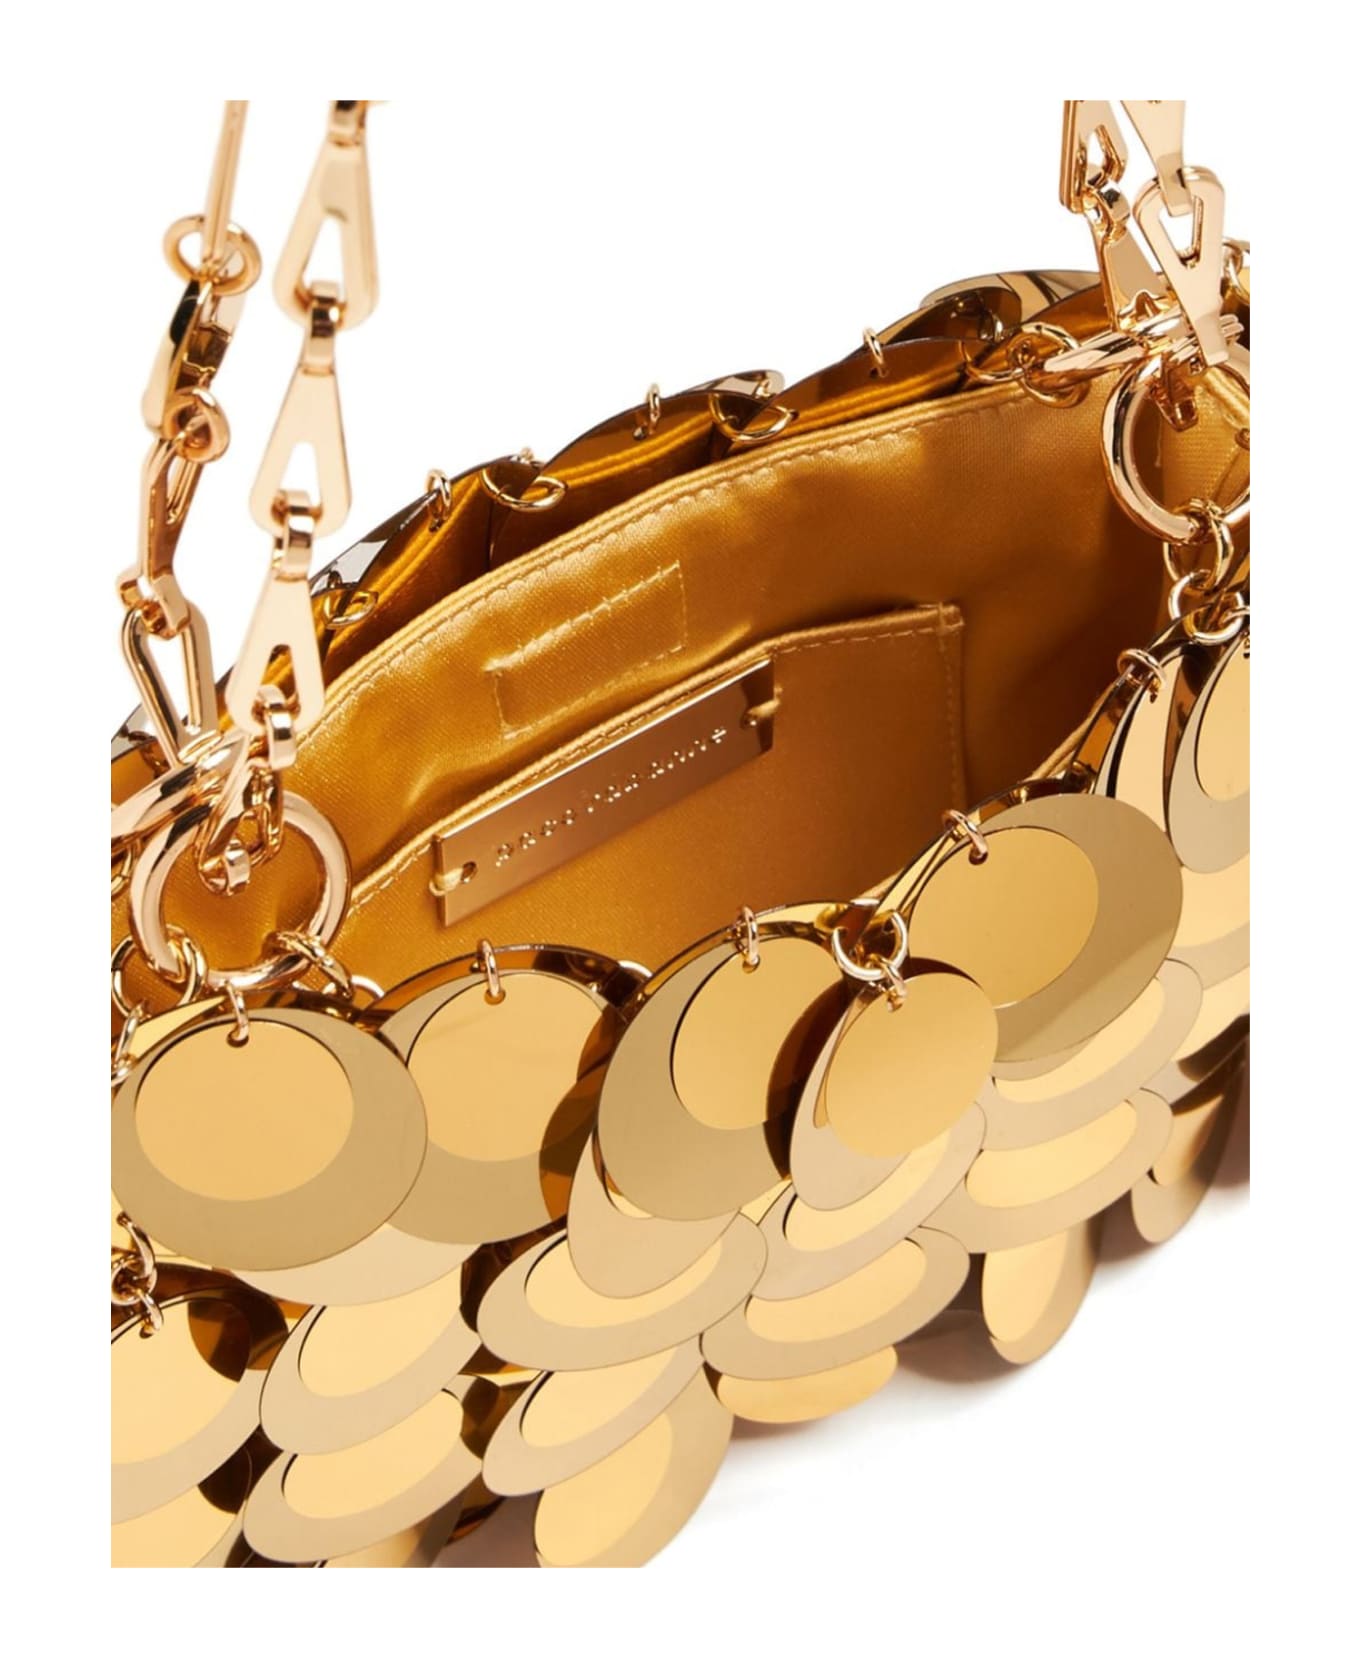 Paco Rabanne Iconic 1969 Sparkle Discs Nano Bag In Gold - Gold